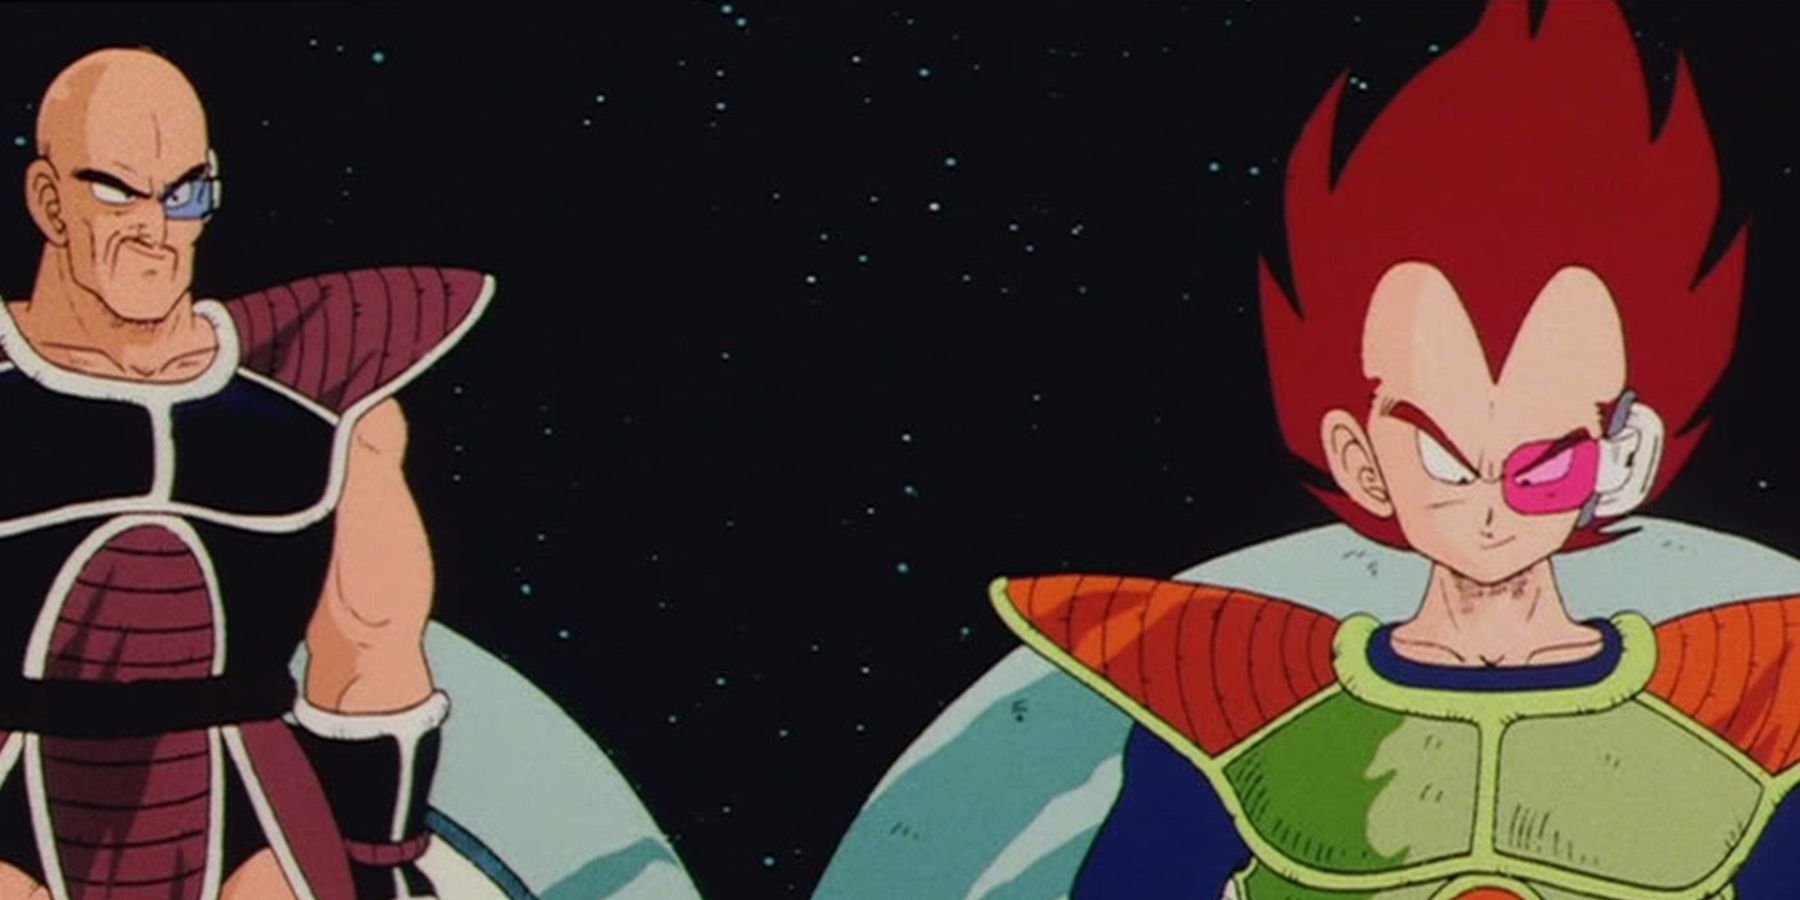 Nappa and Vegeta get ready to travel to Earth in Dragon Ball Z